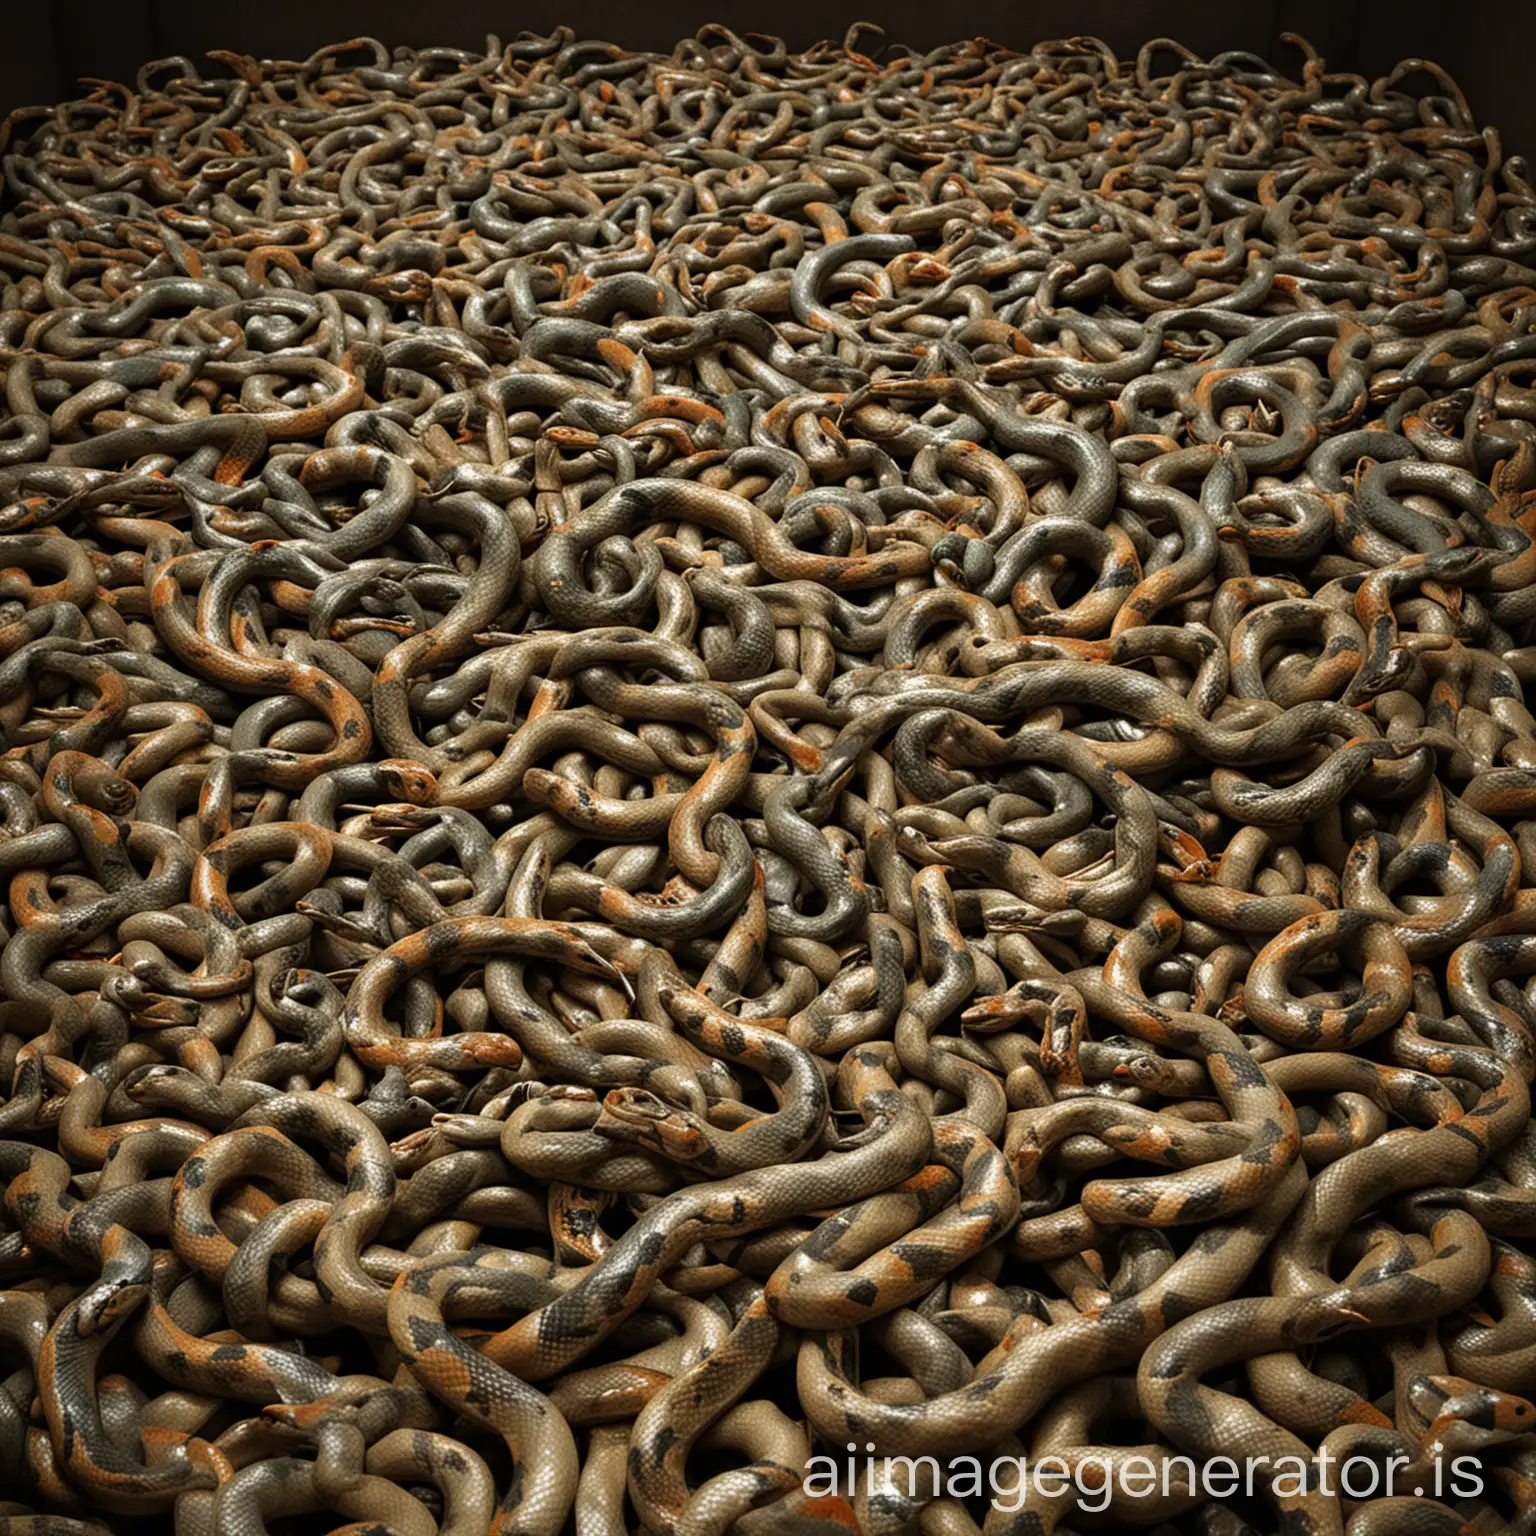 3D-Illustration-of-100-Snakes-Captured-by-Human